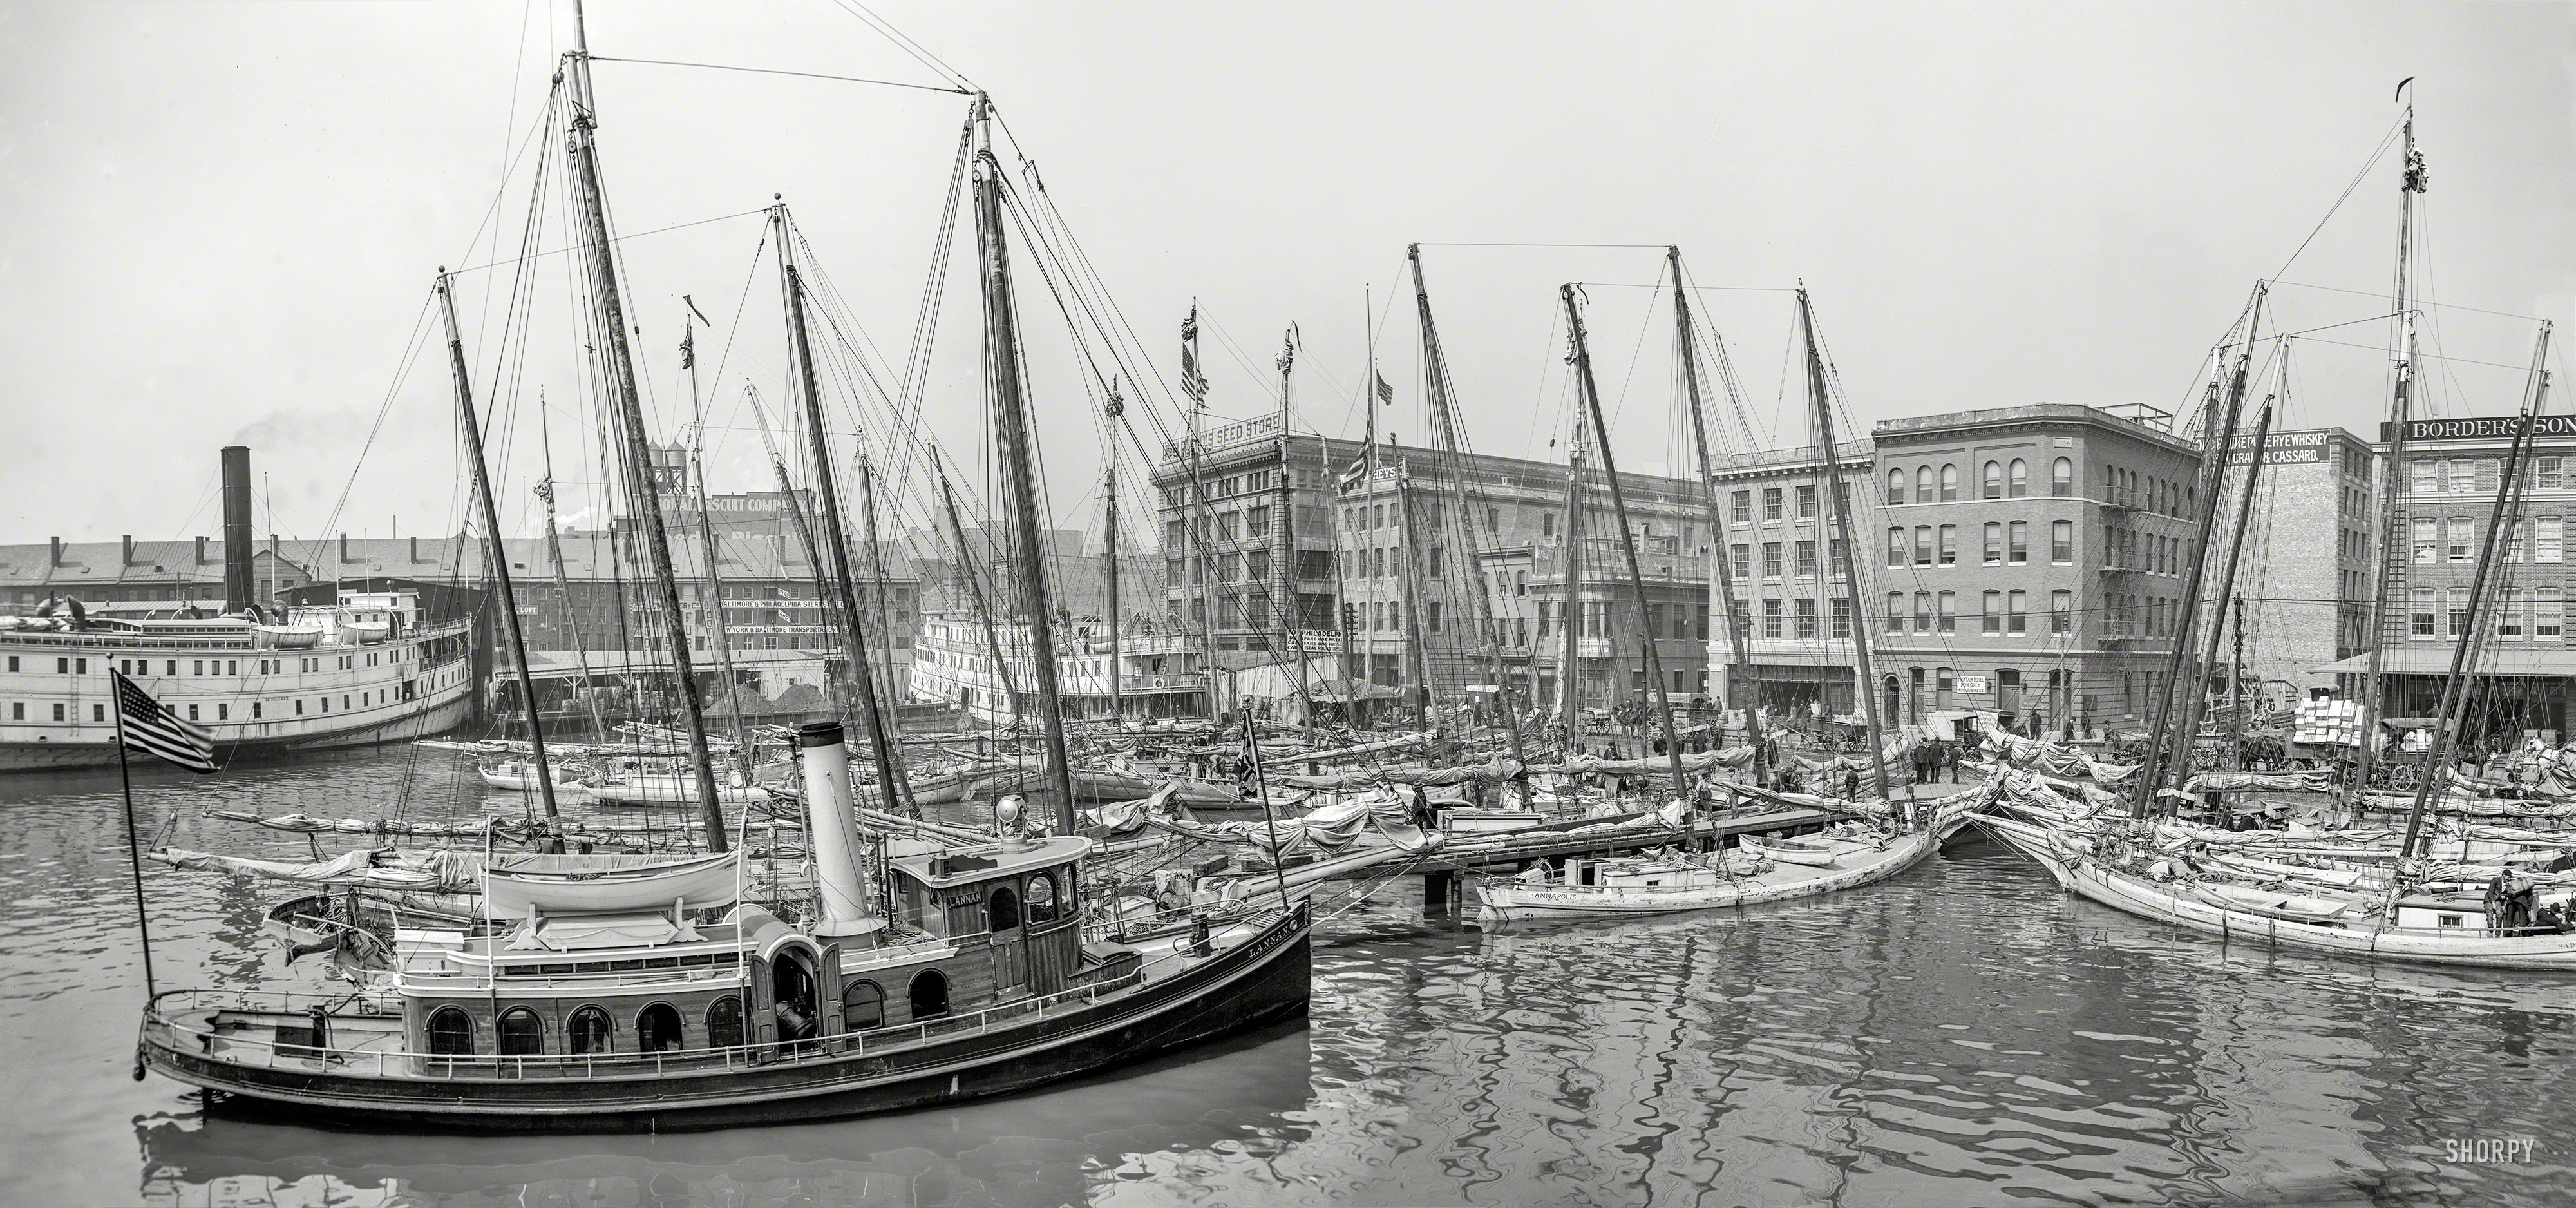 Baltimore circa 1905. "Oyster luggers at the docks." Panorama made from two 8x10 inch glass negatives. Detroit Photographic Company. View full size.